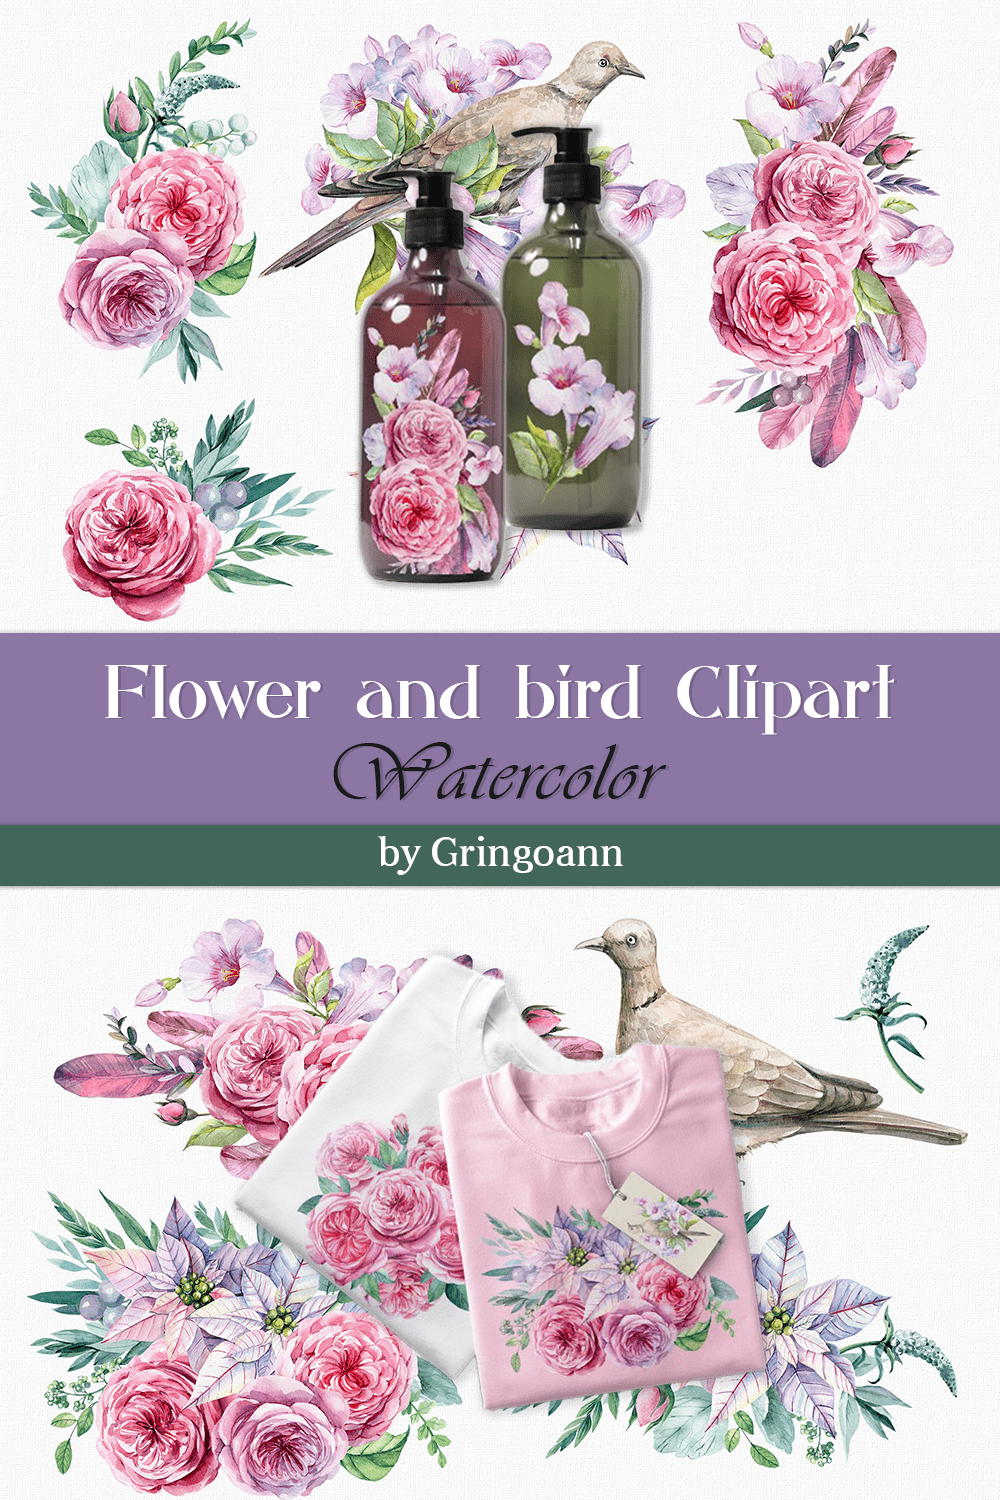 Flower and Bird Clipart. Watercolor pinterest image.